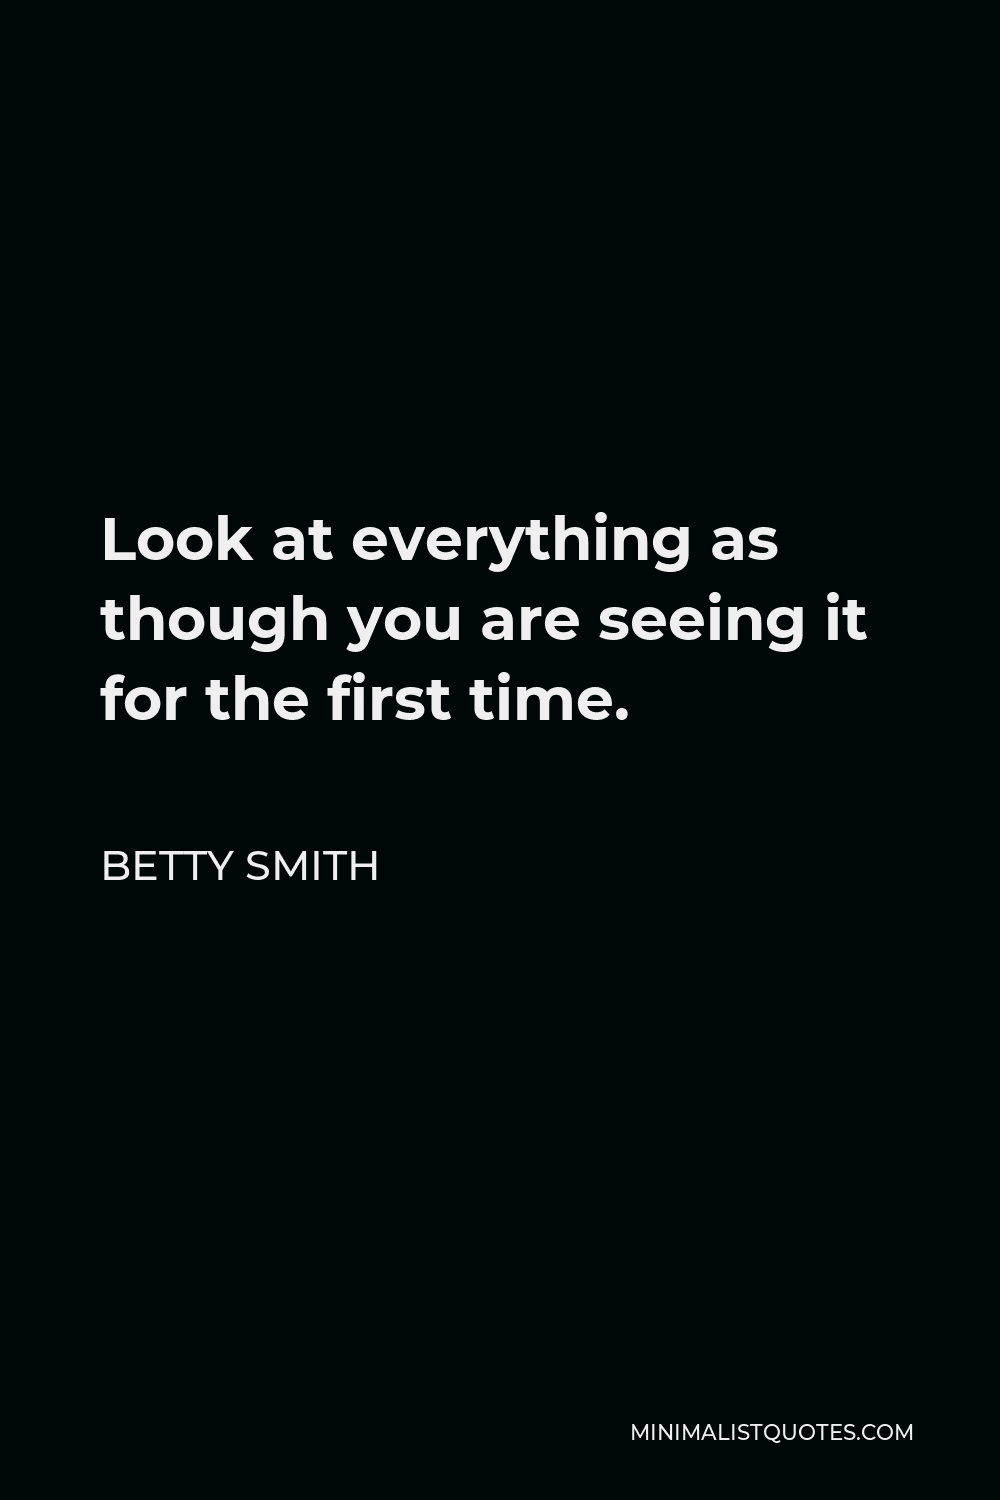 Betty Smith Quote - Look at everything as though you are seeing it for the first time.